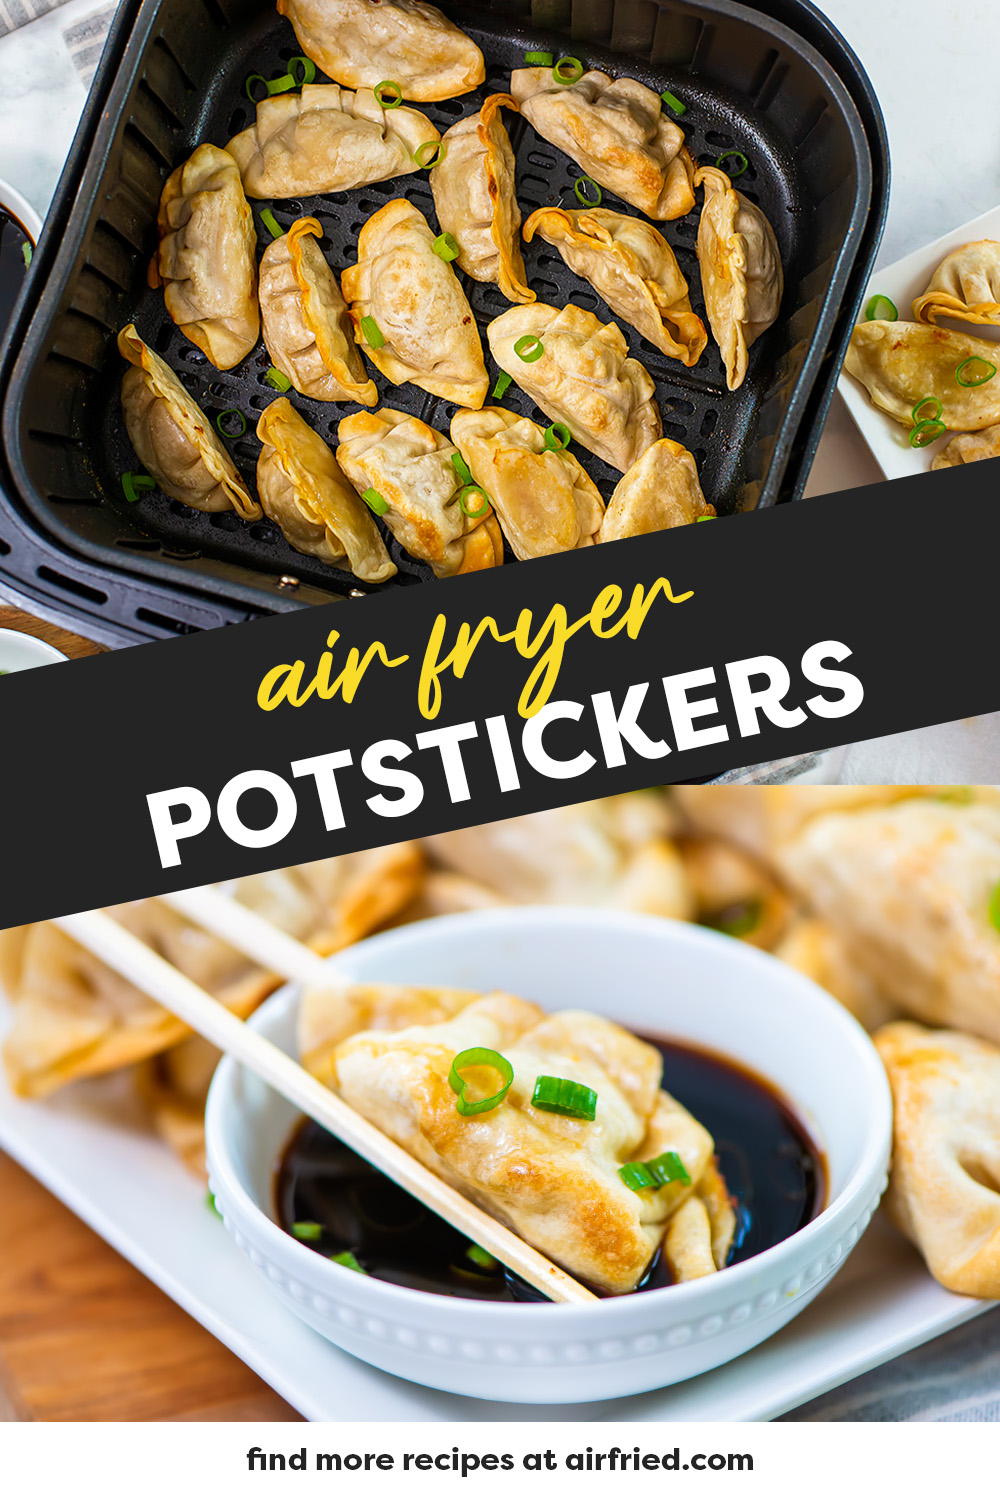 These air fryer frozen potstickers are a quick way to get an Asian favorite on the table. Use your favorite frozen potstickers in this recipe and serve with a variety of dipping sauces for an easy side dish, appetizer, or snack!